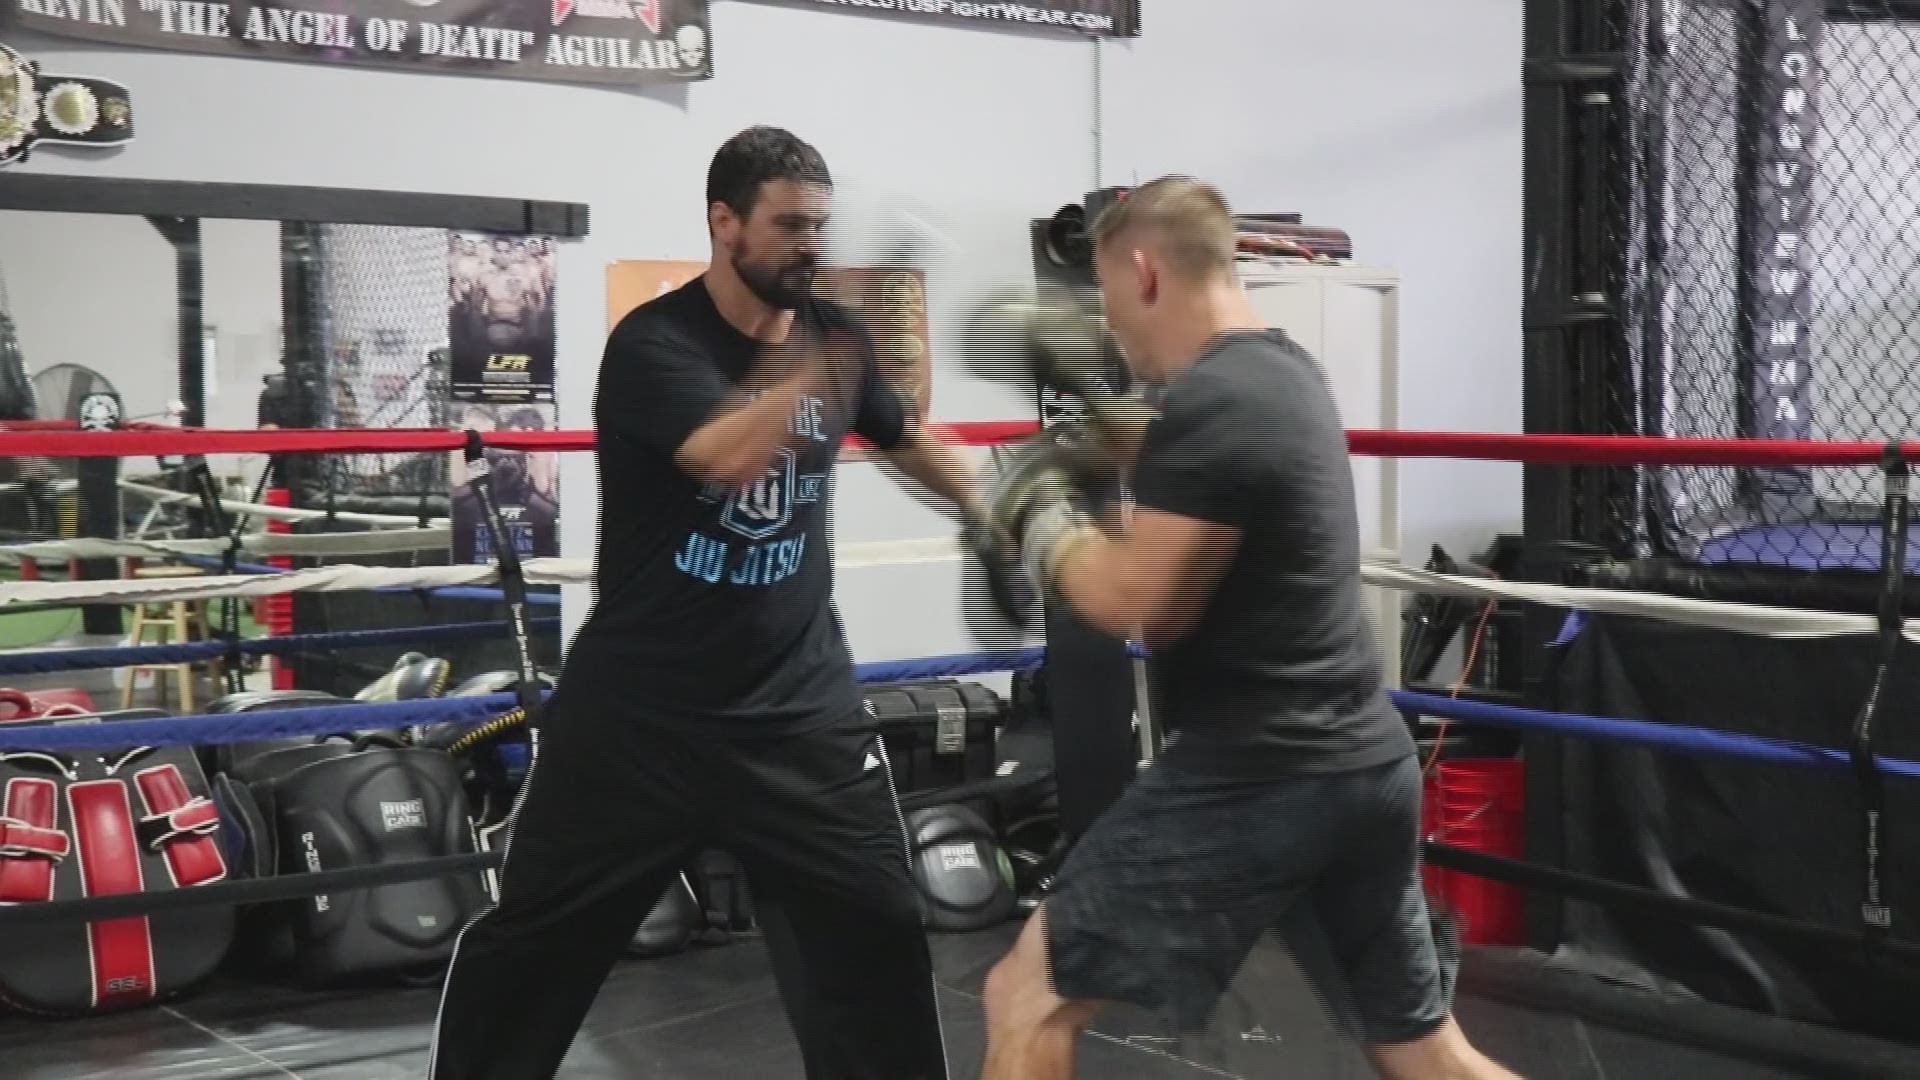 Derrick Krantz spoke to CBS19 Thursday ahead of his second pro fight in China.